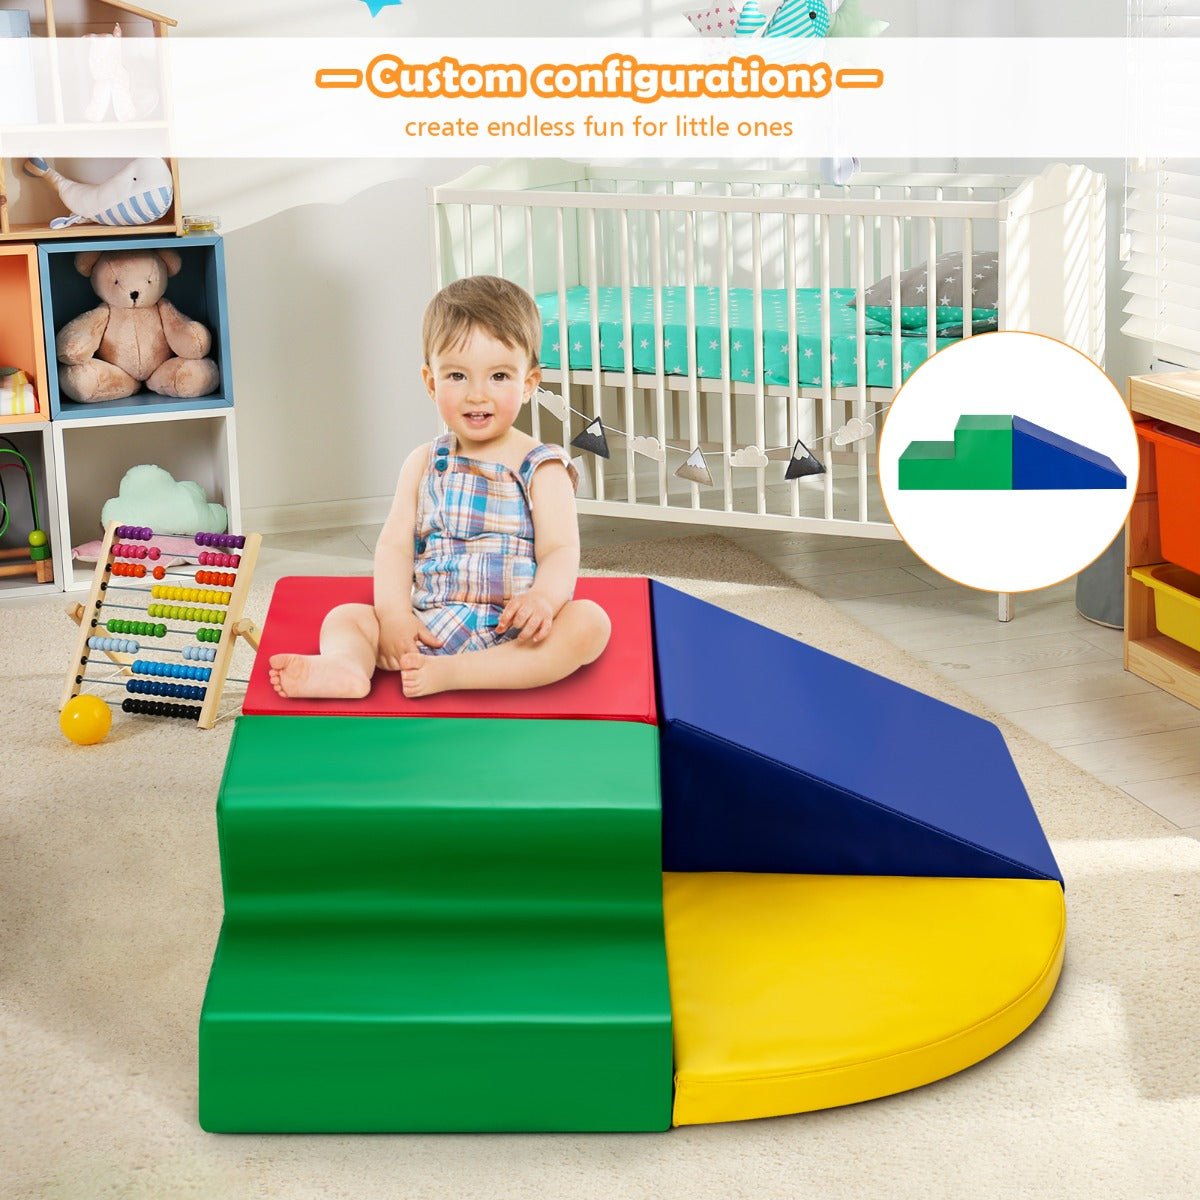 Ideal for Kindergartens and Bedrooms